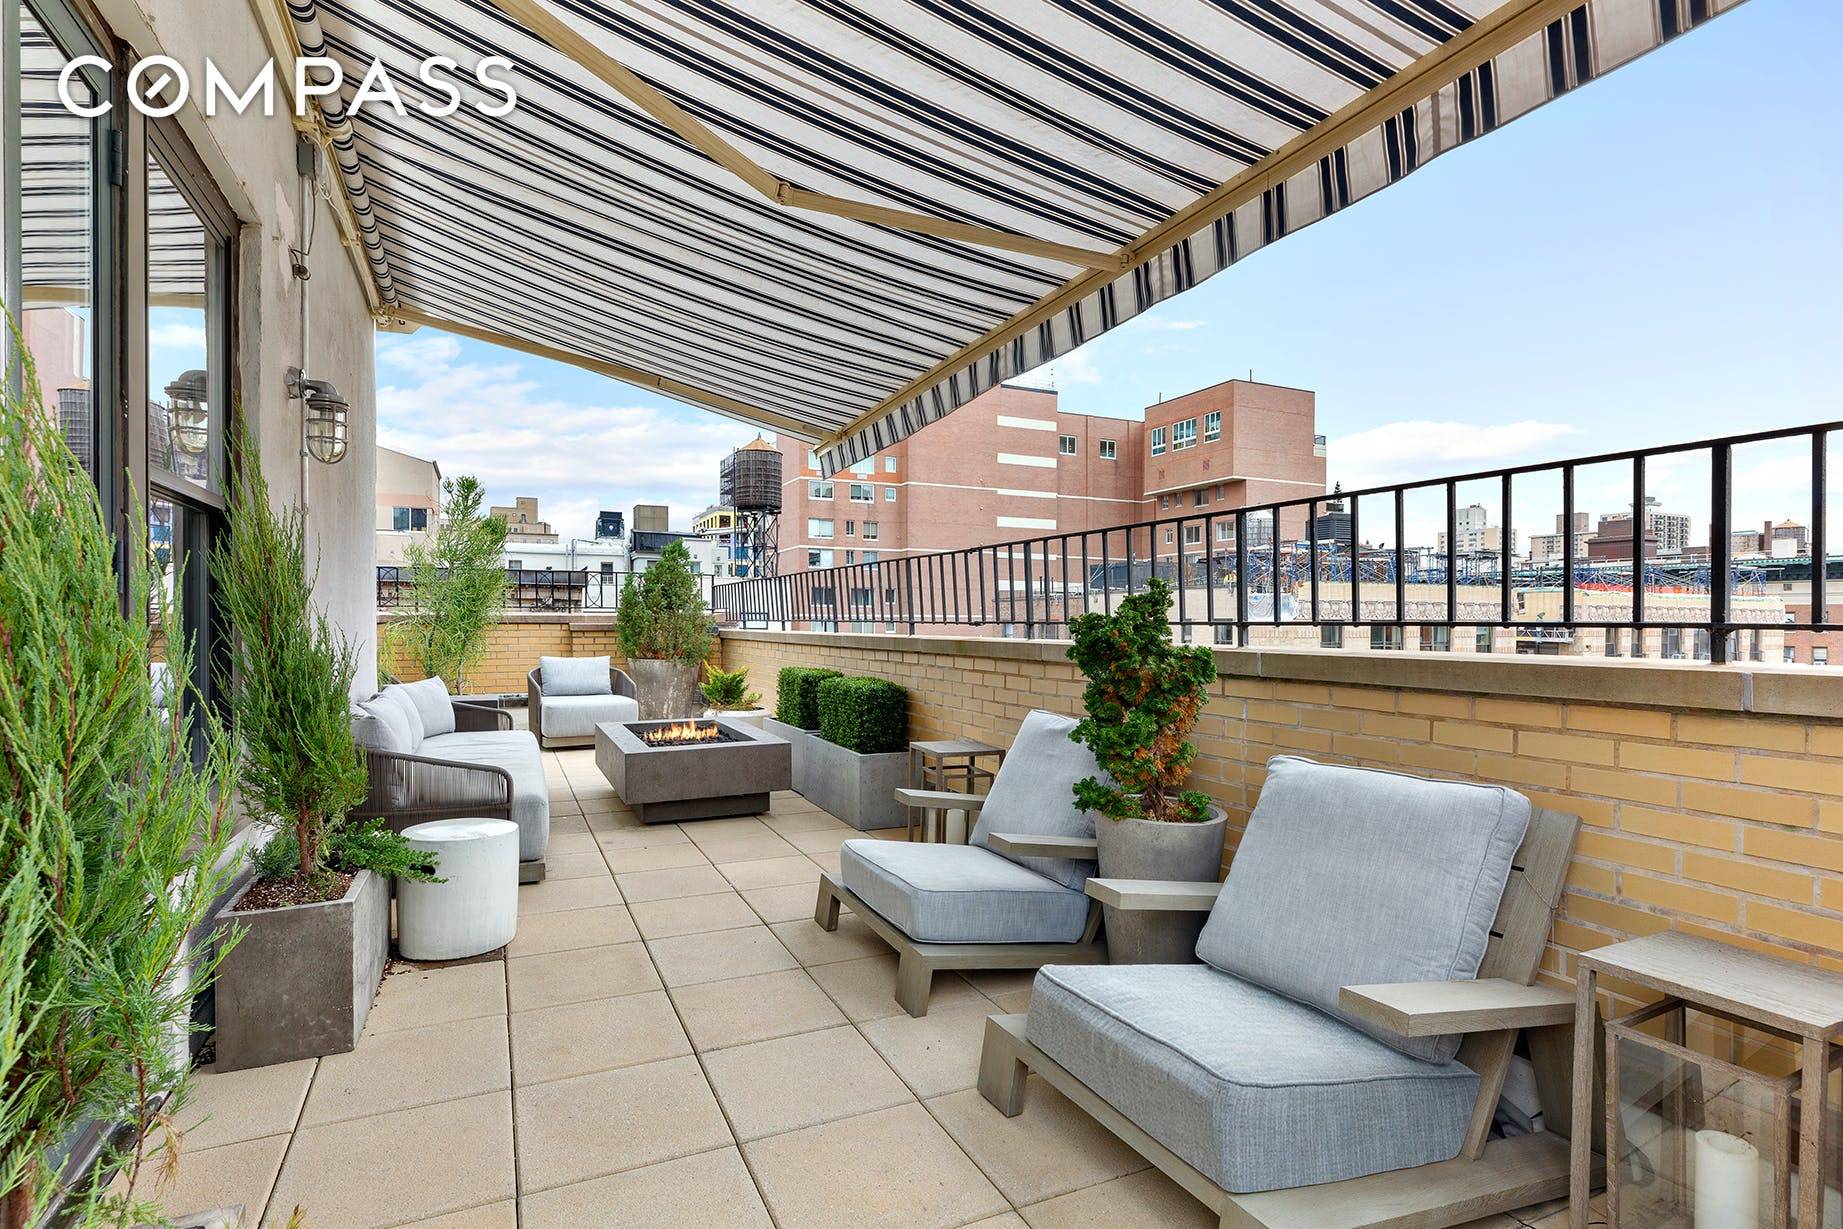 Exquisitely Renovated Penthouse with Generous Wrap Terrace This flawless, and brilliantly sunny two bedroom, two and a half bathroom penthouse includes a walled wrap terrace, measuring approximately 623 square feet.